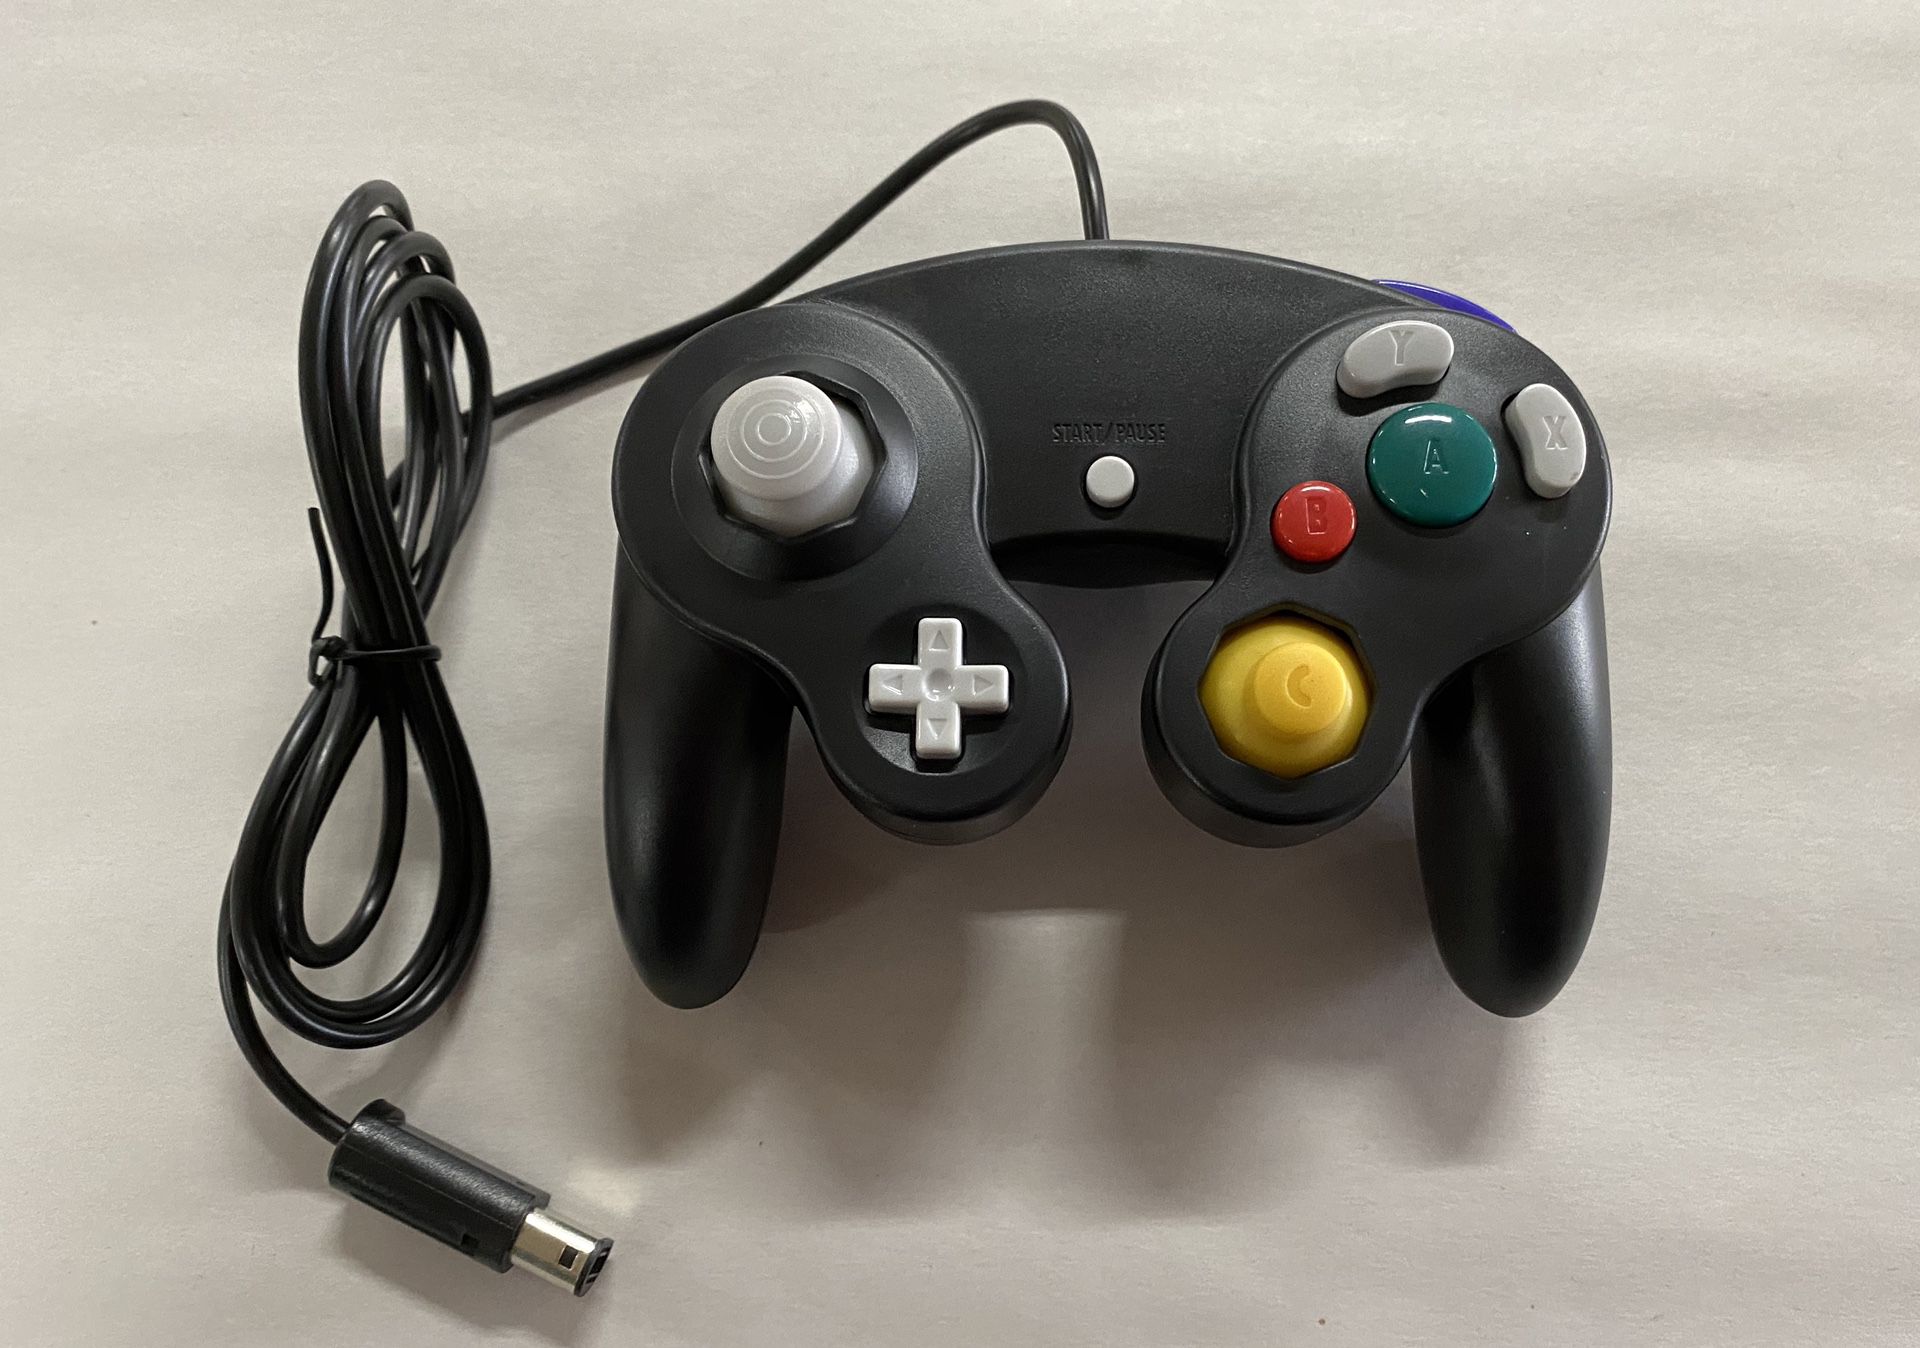 Wired NGC Controller for Nintendo GameCube/ Wii U Console!